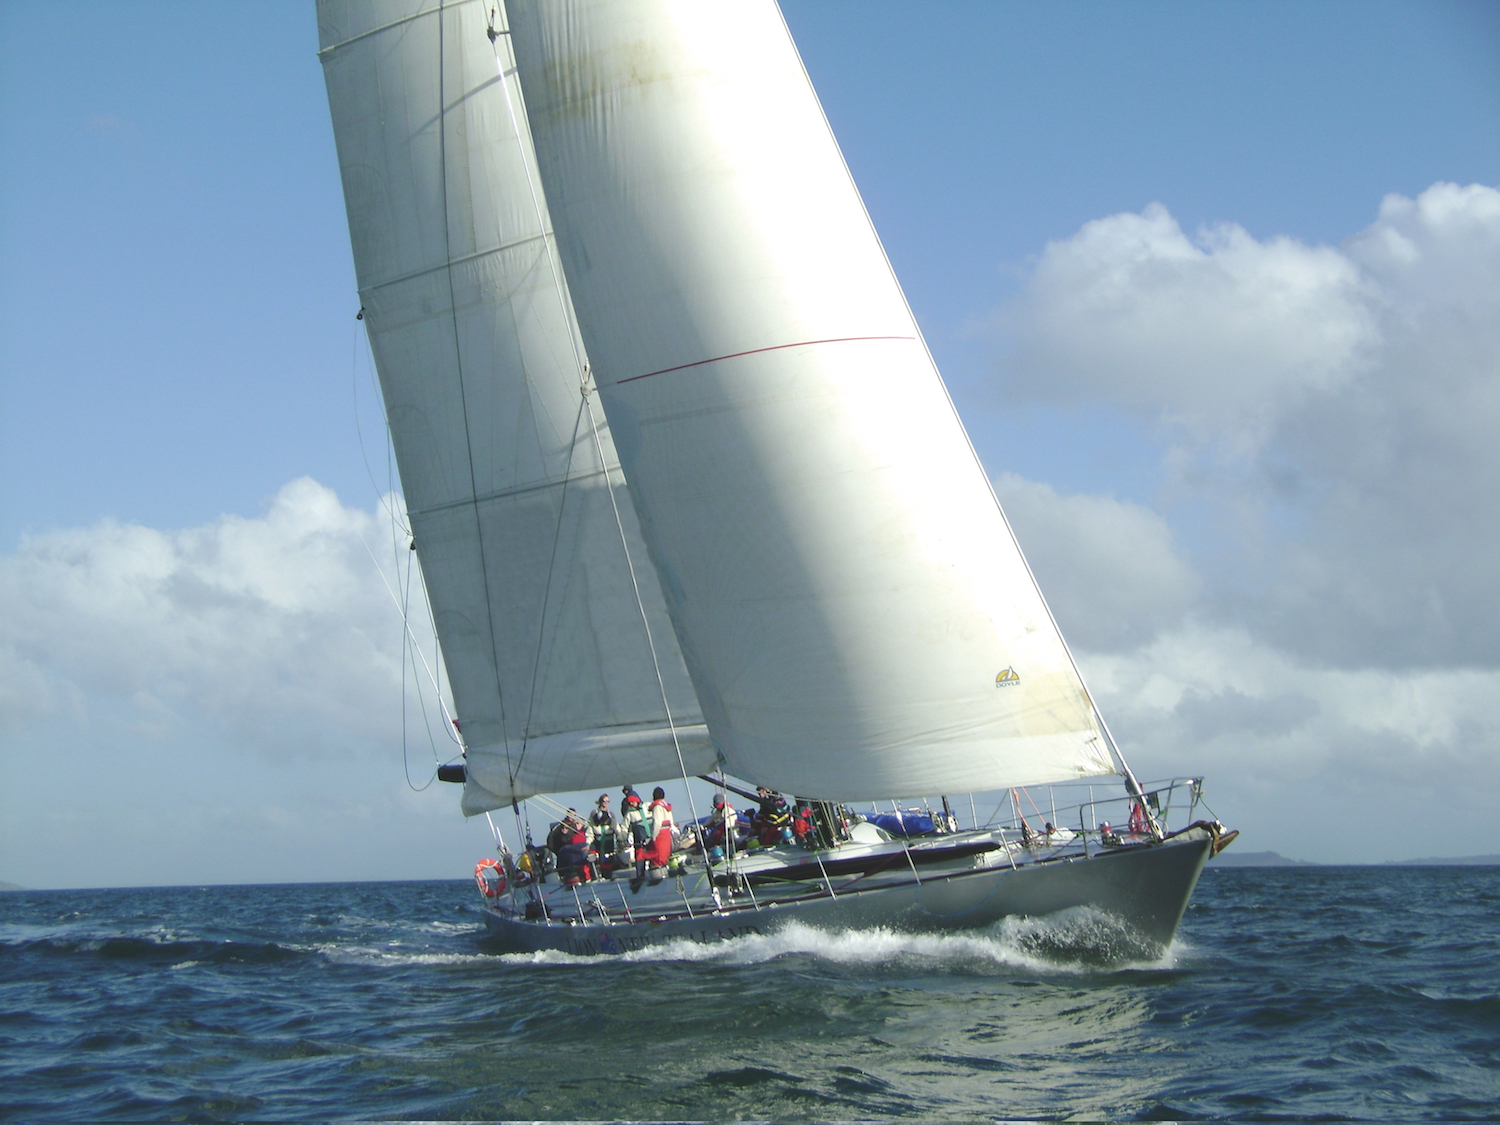 Lion New Zealand sailing fast, after 18 month refit, ready for another 30 years of sailing